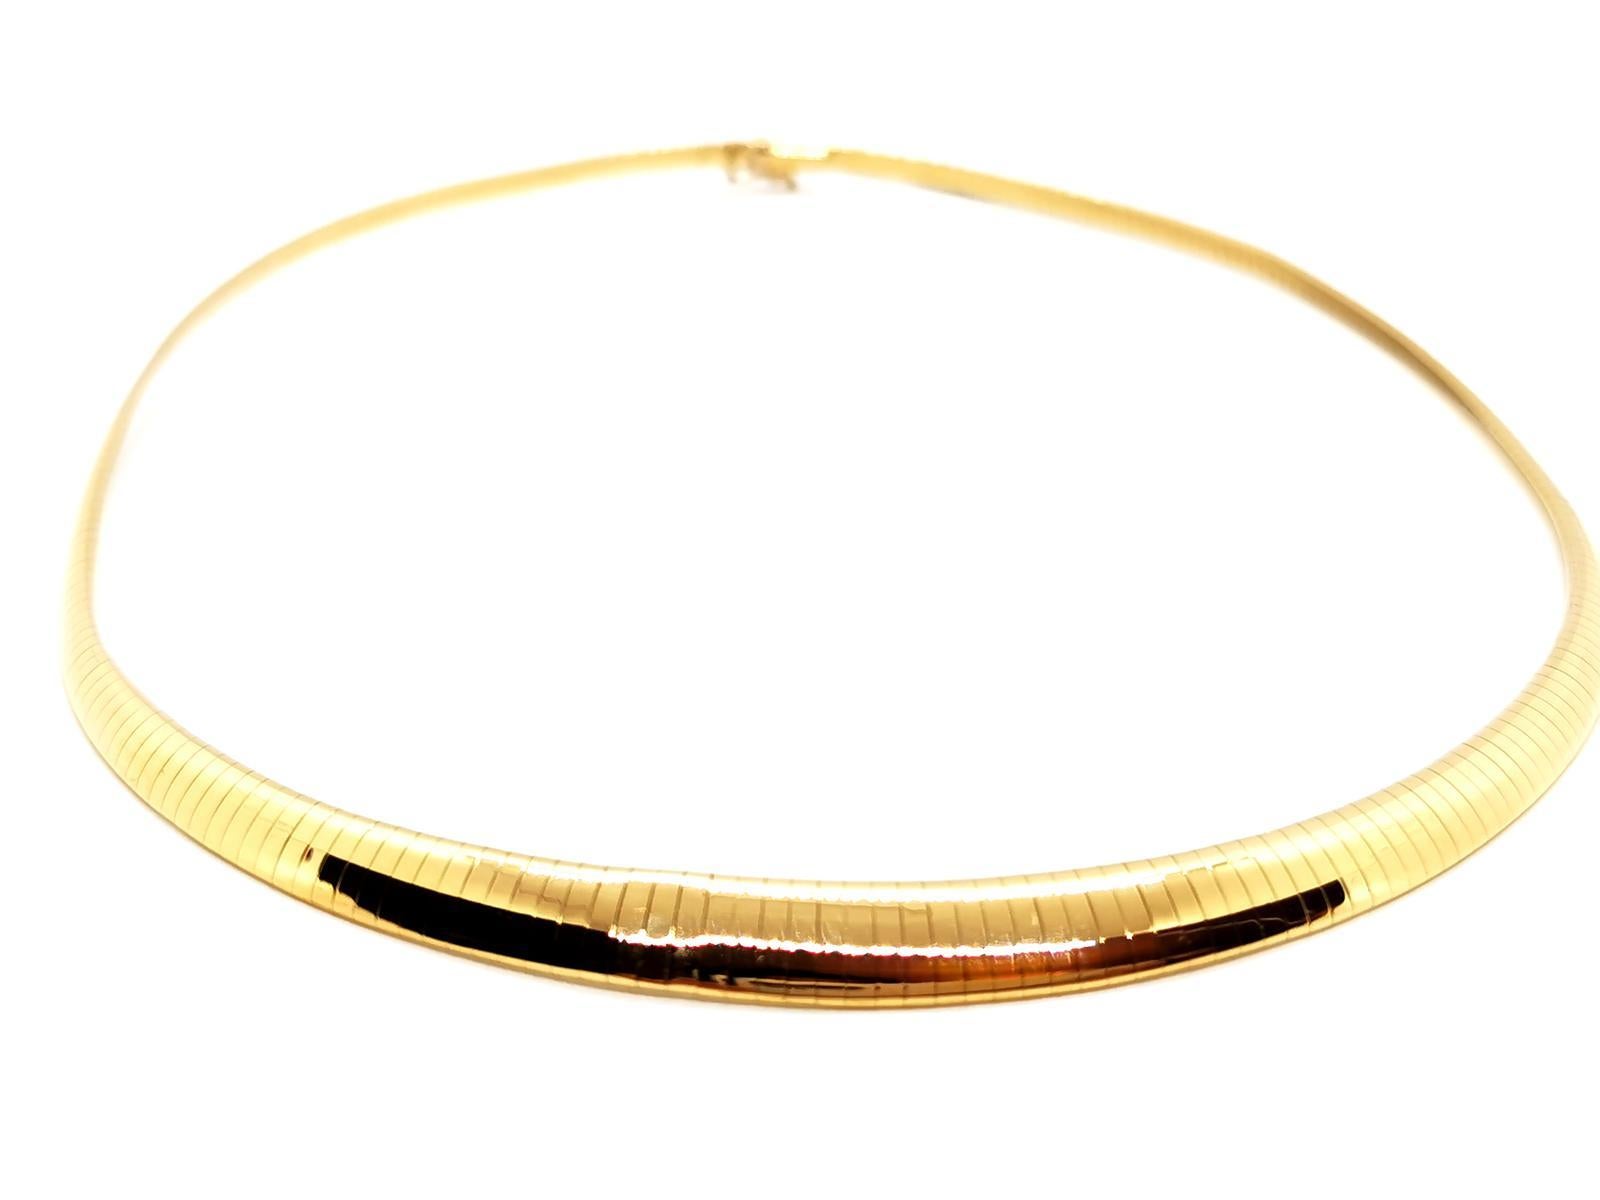 
Necklace in yellow gold 750 thousandths (18 carats). falling omega mesh. width at the front: 0.87 cm. width at the back: 0.39 cm. length: 46.5 cm. total weight: 34.08 g. eagle's head hallmark. excellent condition
